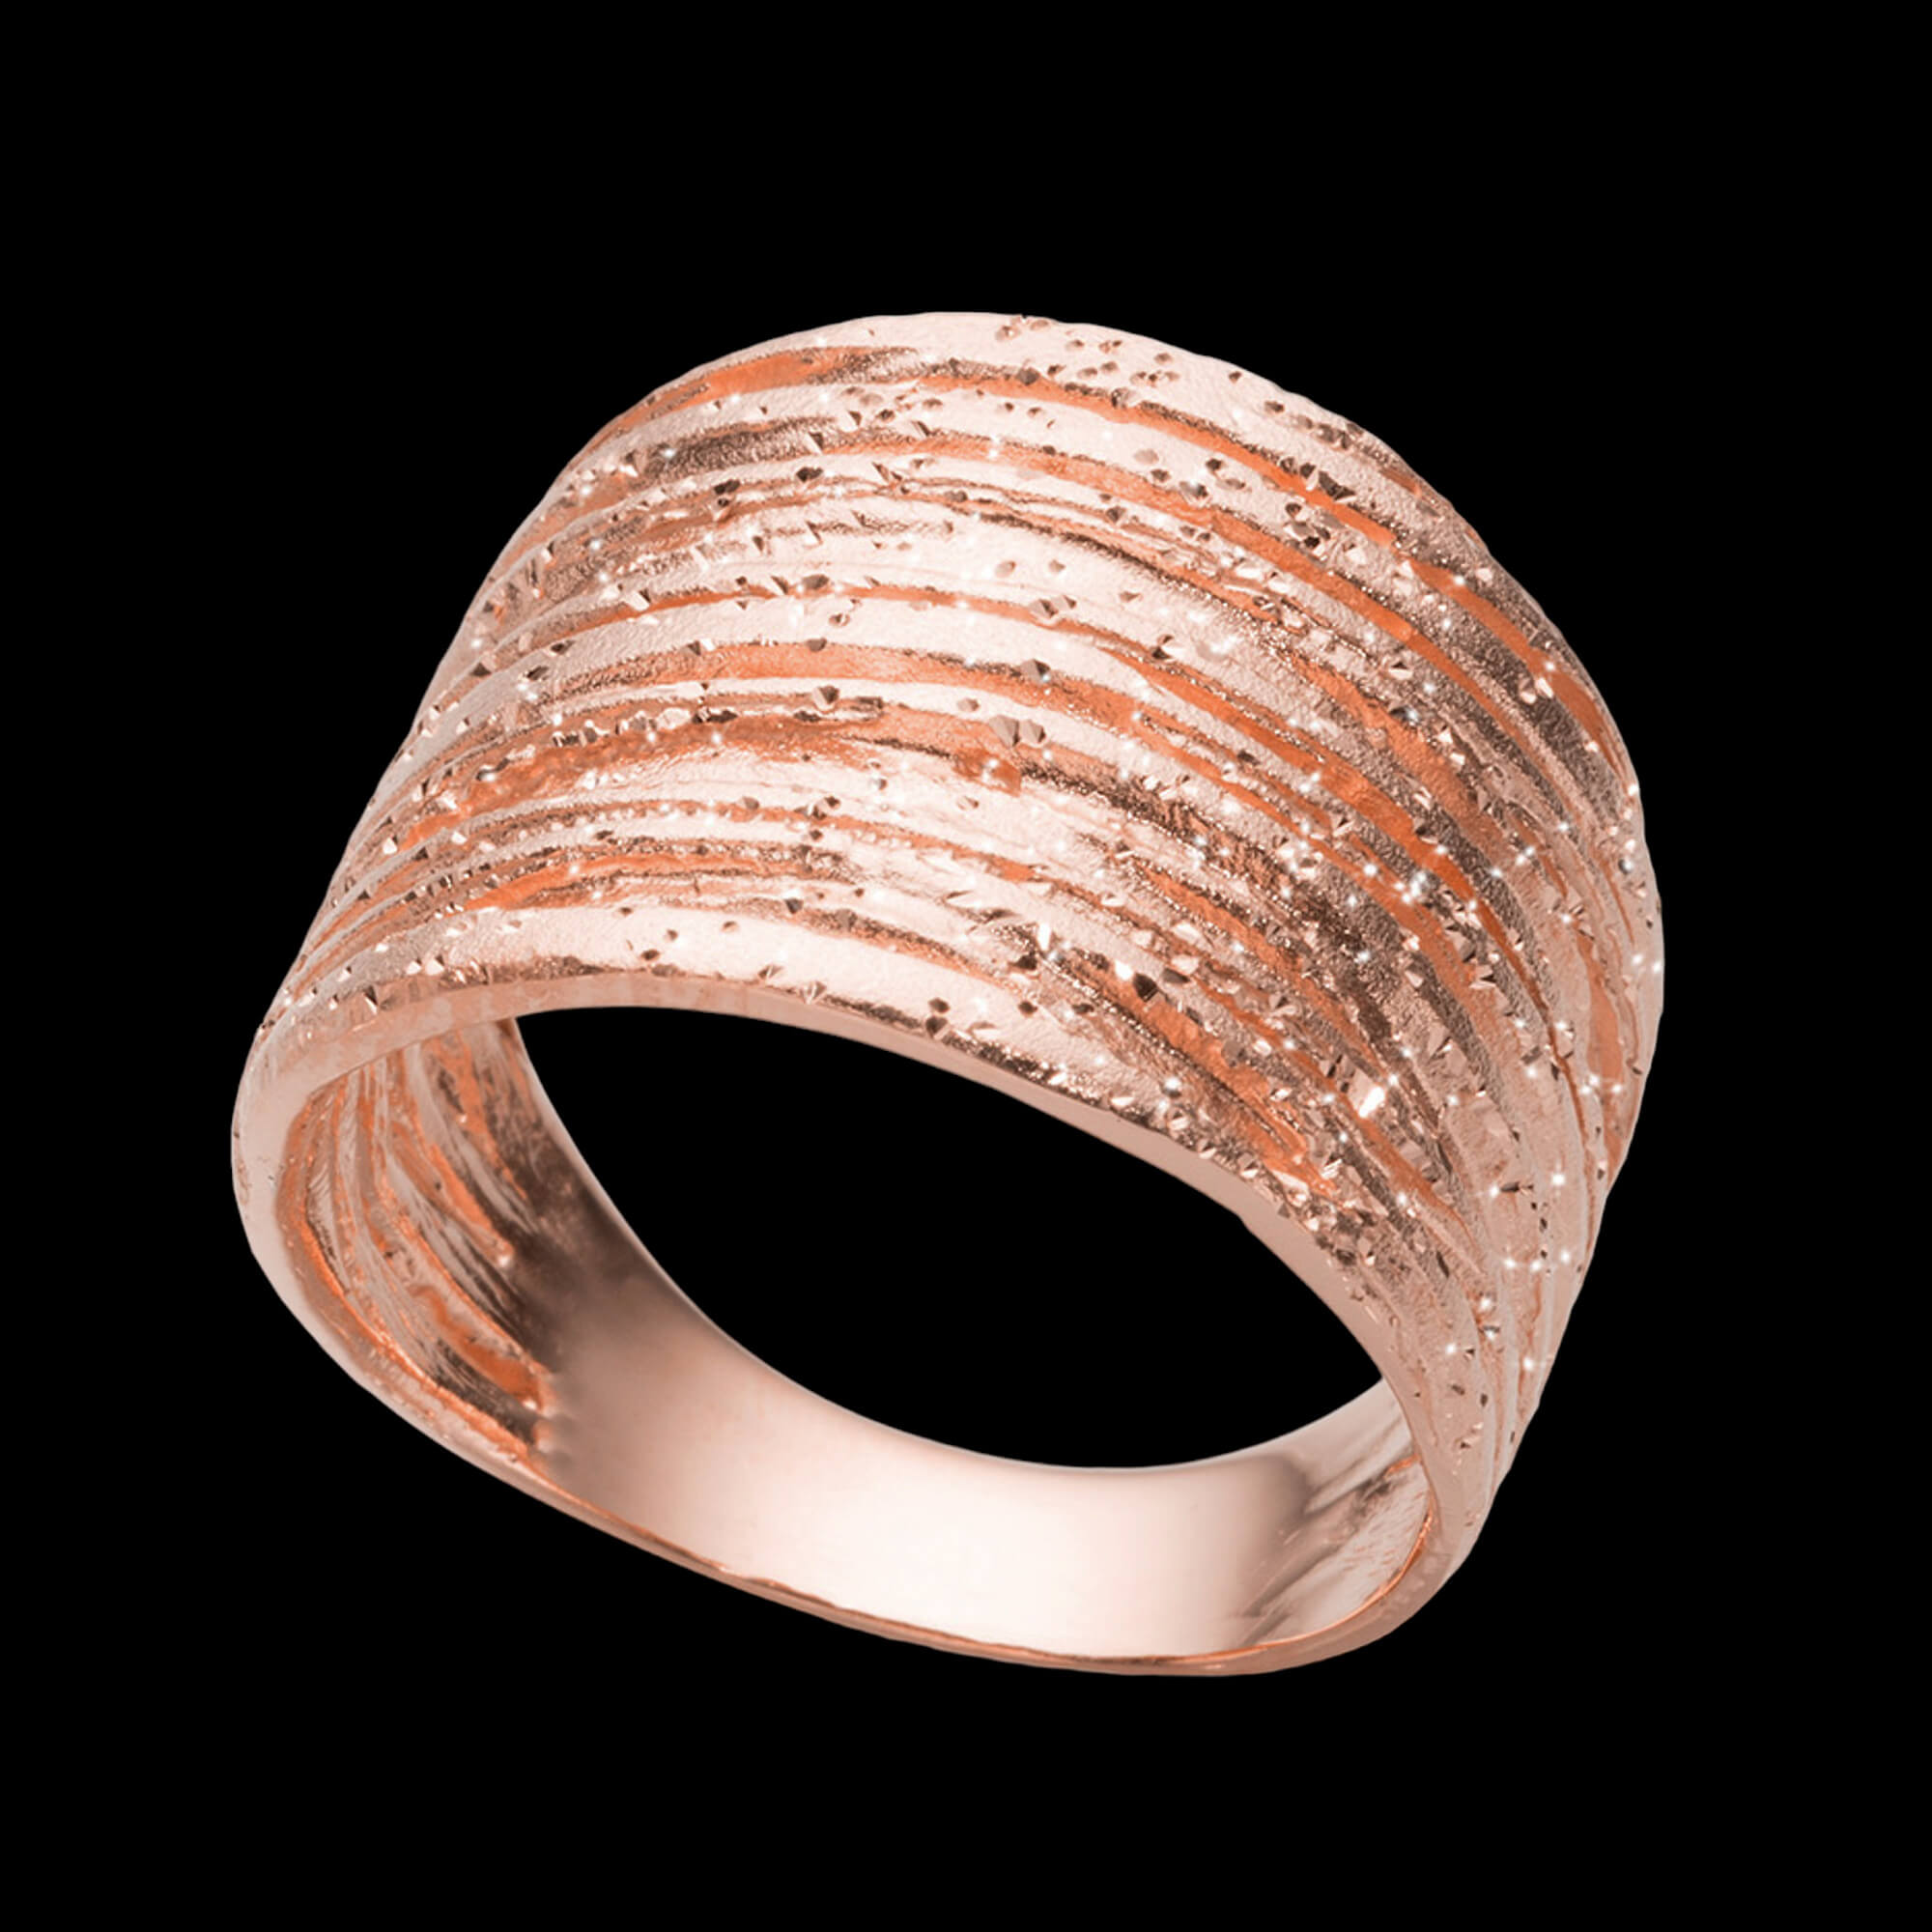 Beautiful and striped rosé ring